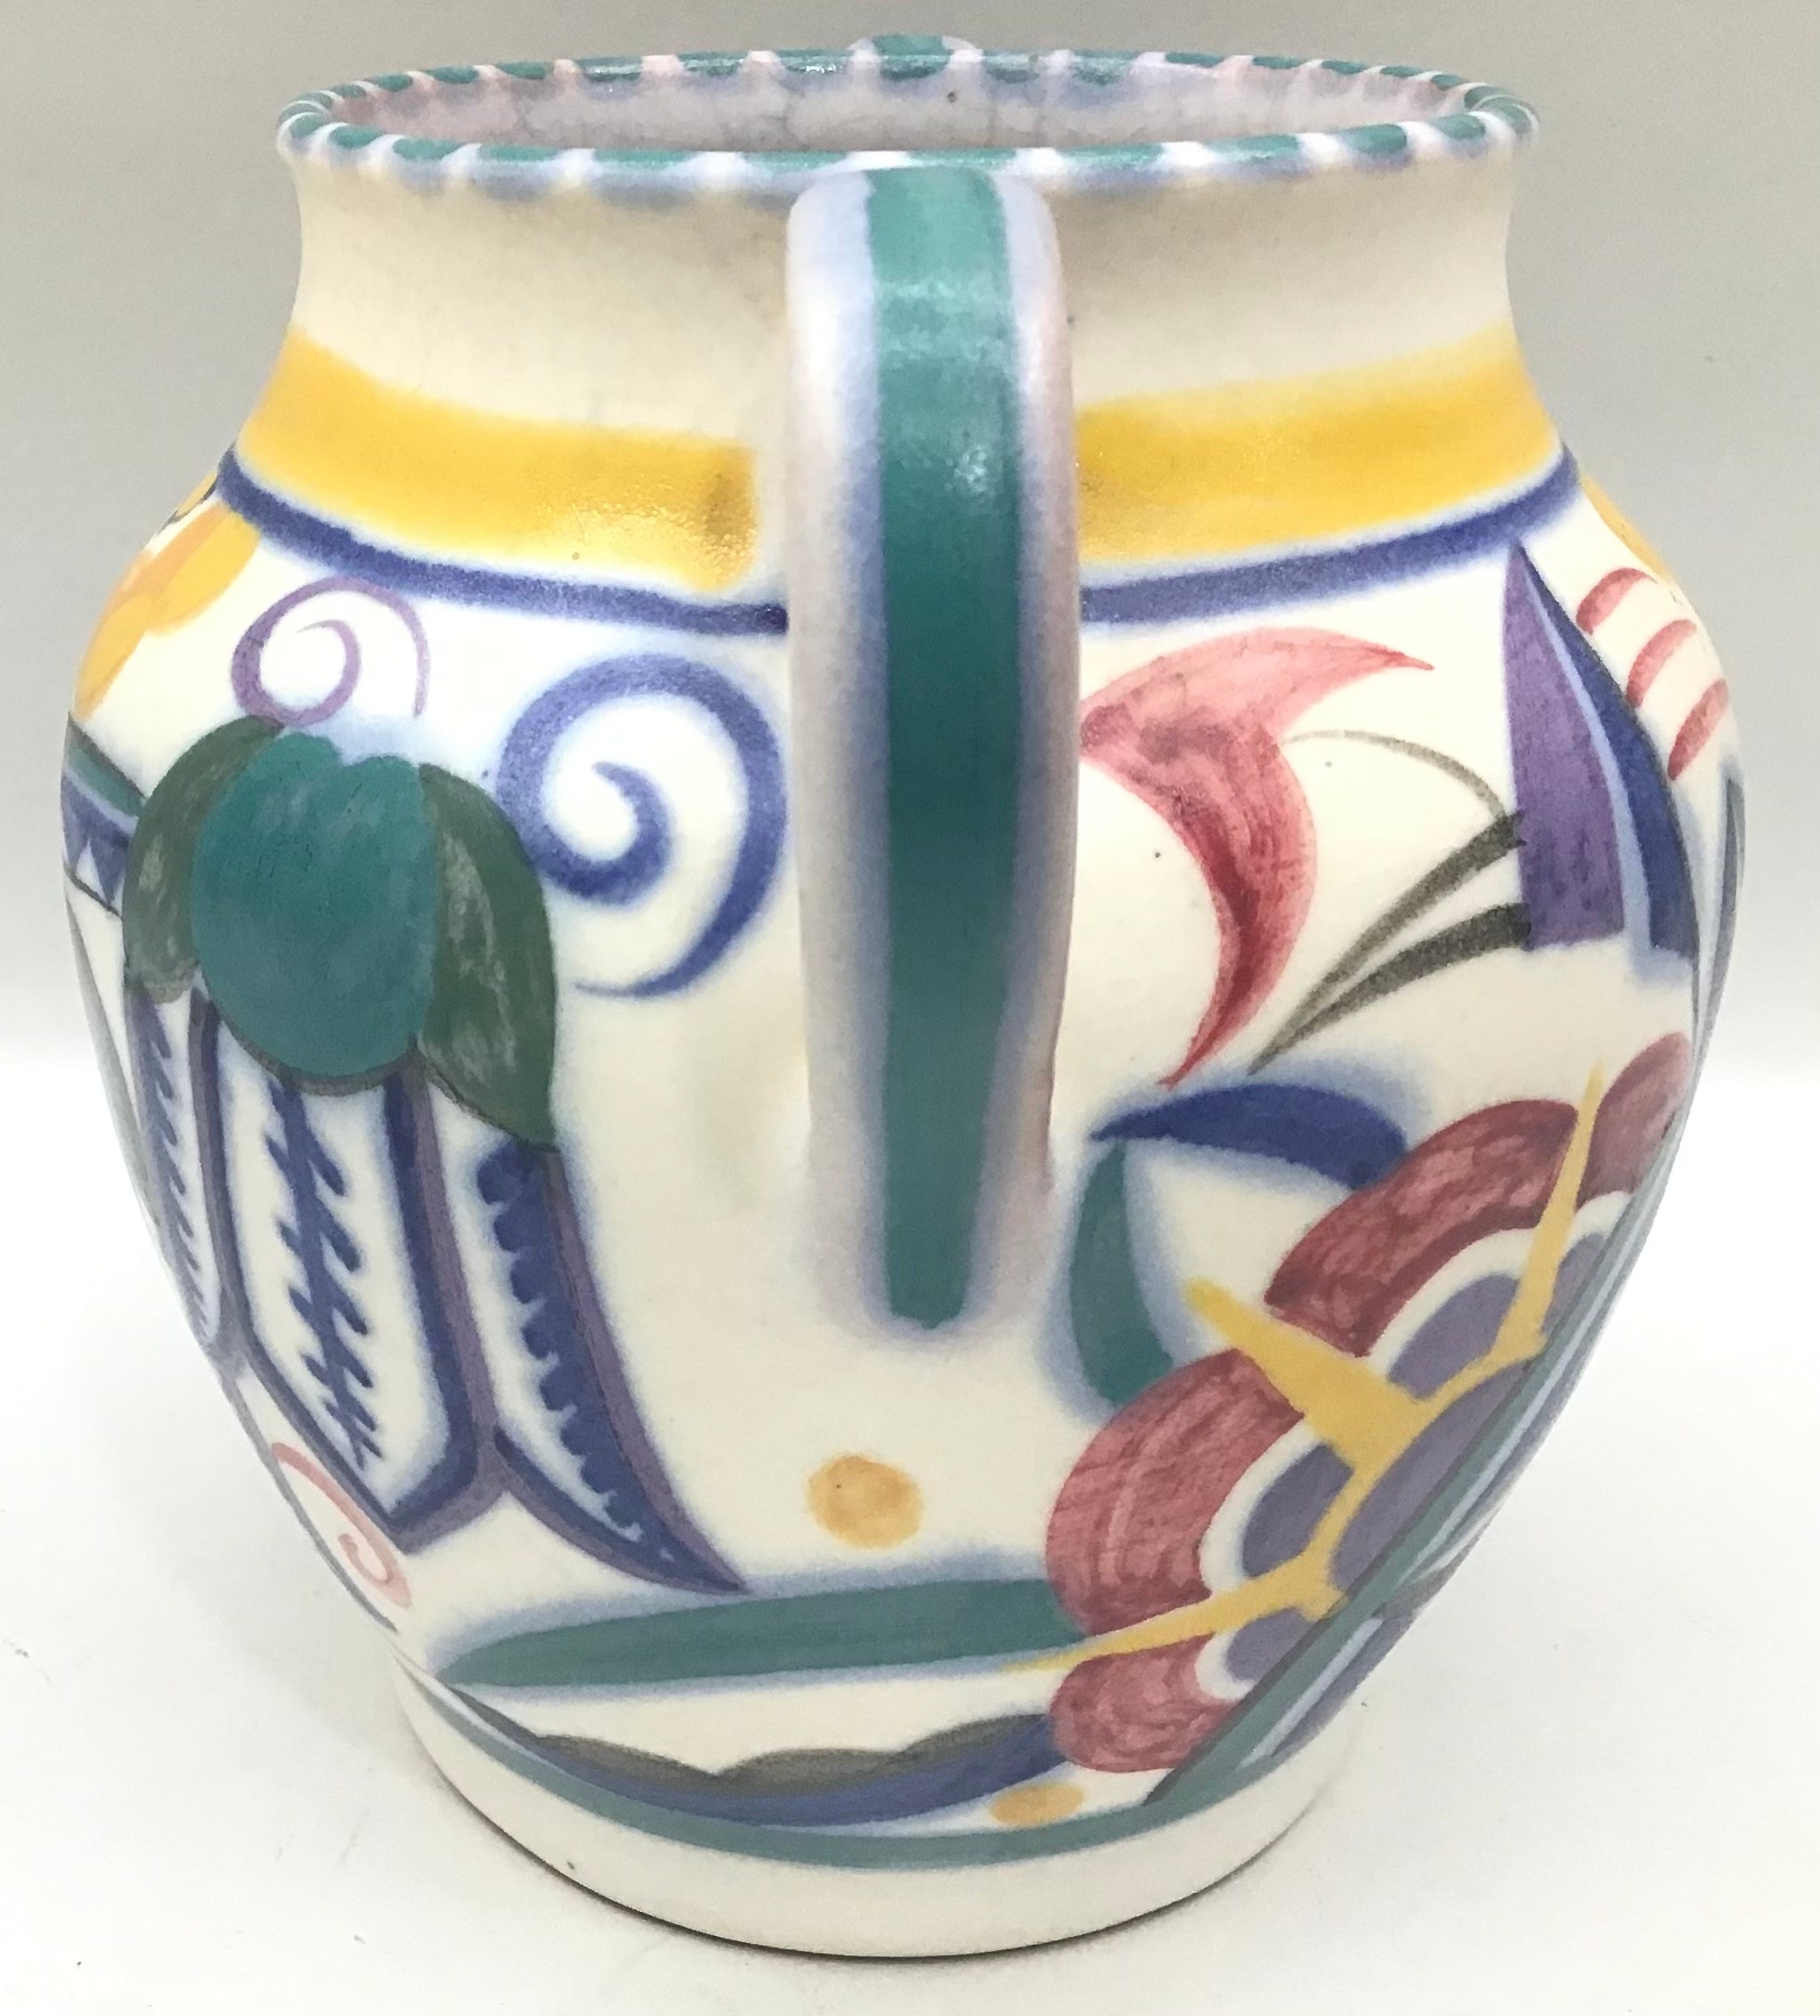 Poole Pottery shape 401 TY pattern twin handled vase decorated by Marian Heath 4.9" high. - Image 2 of 6